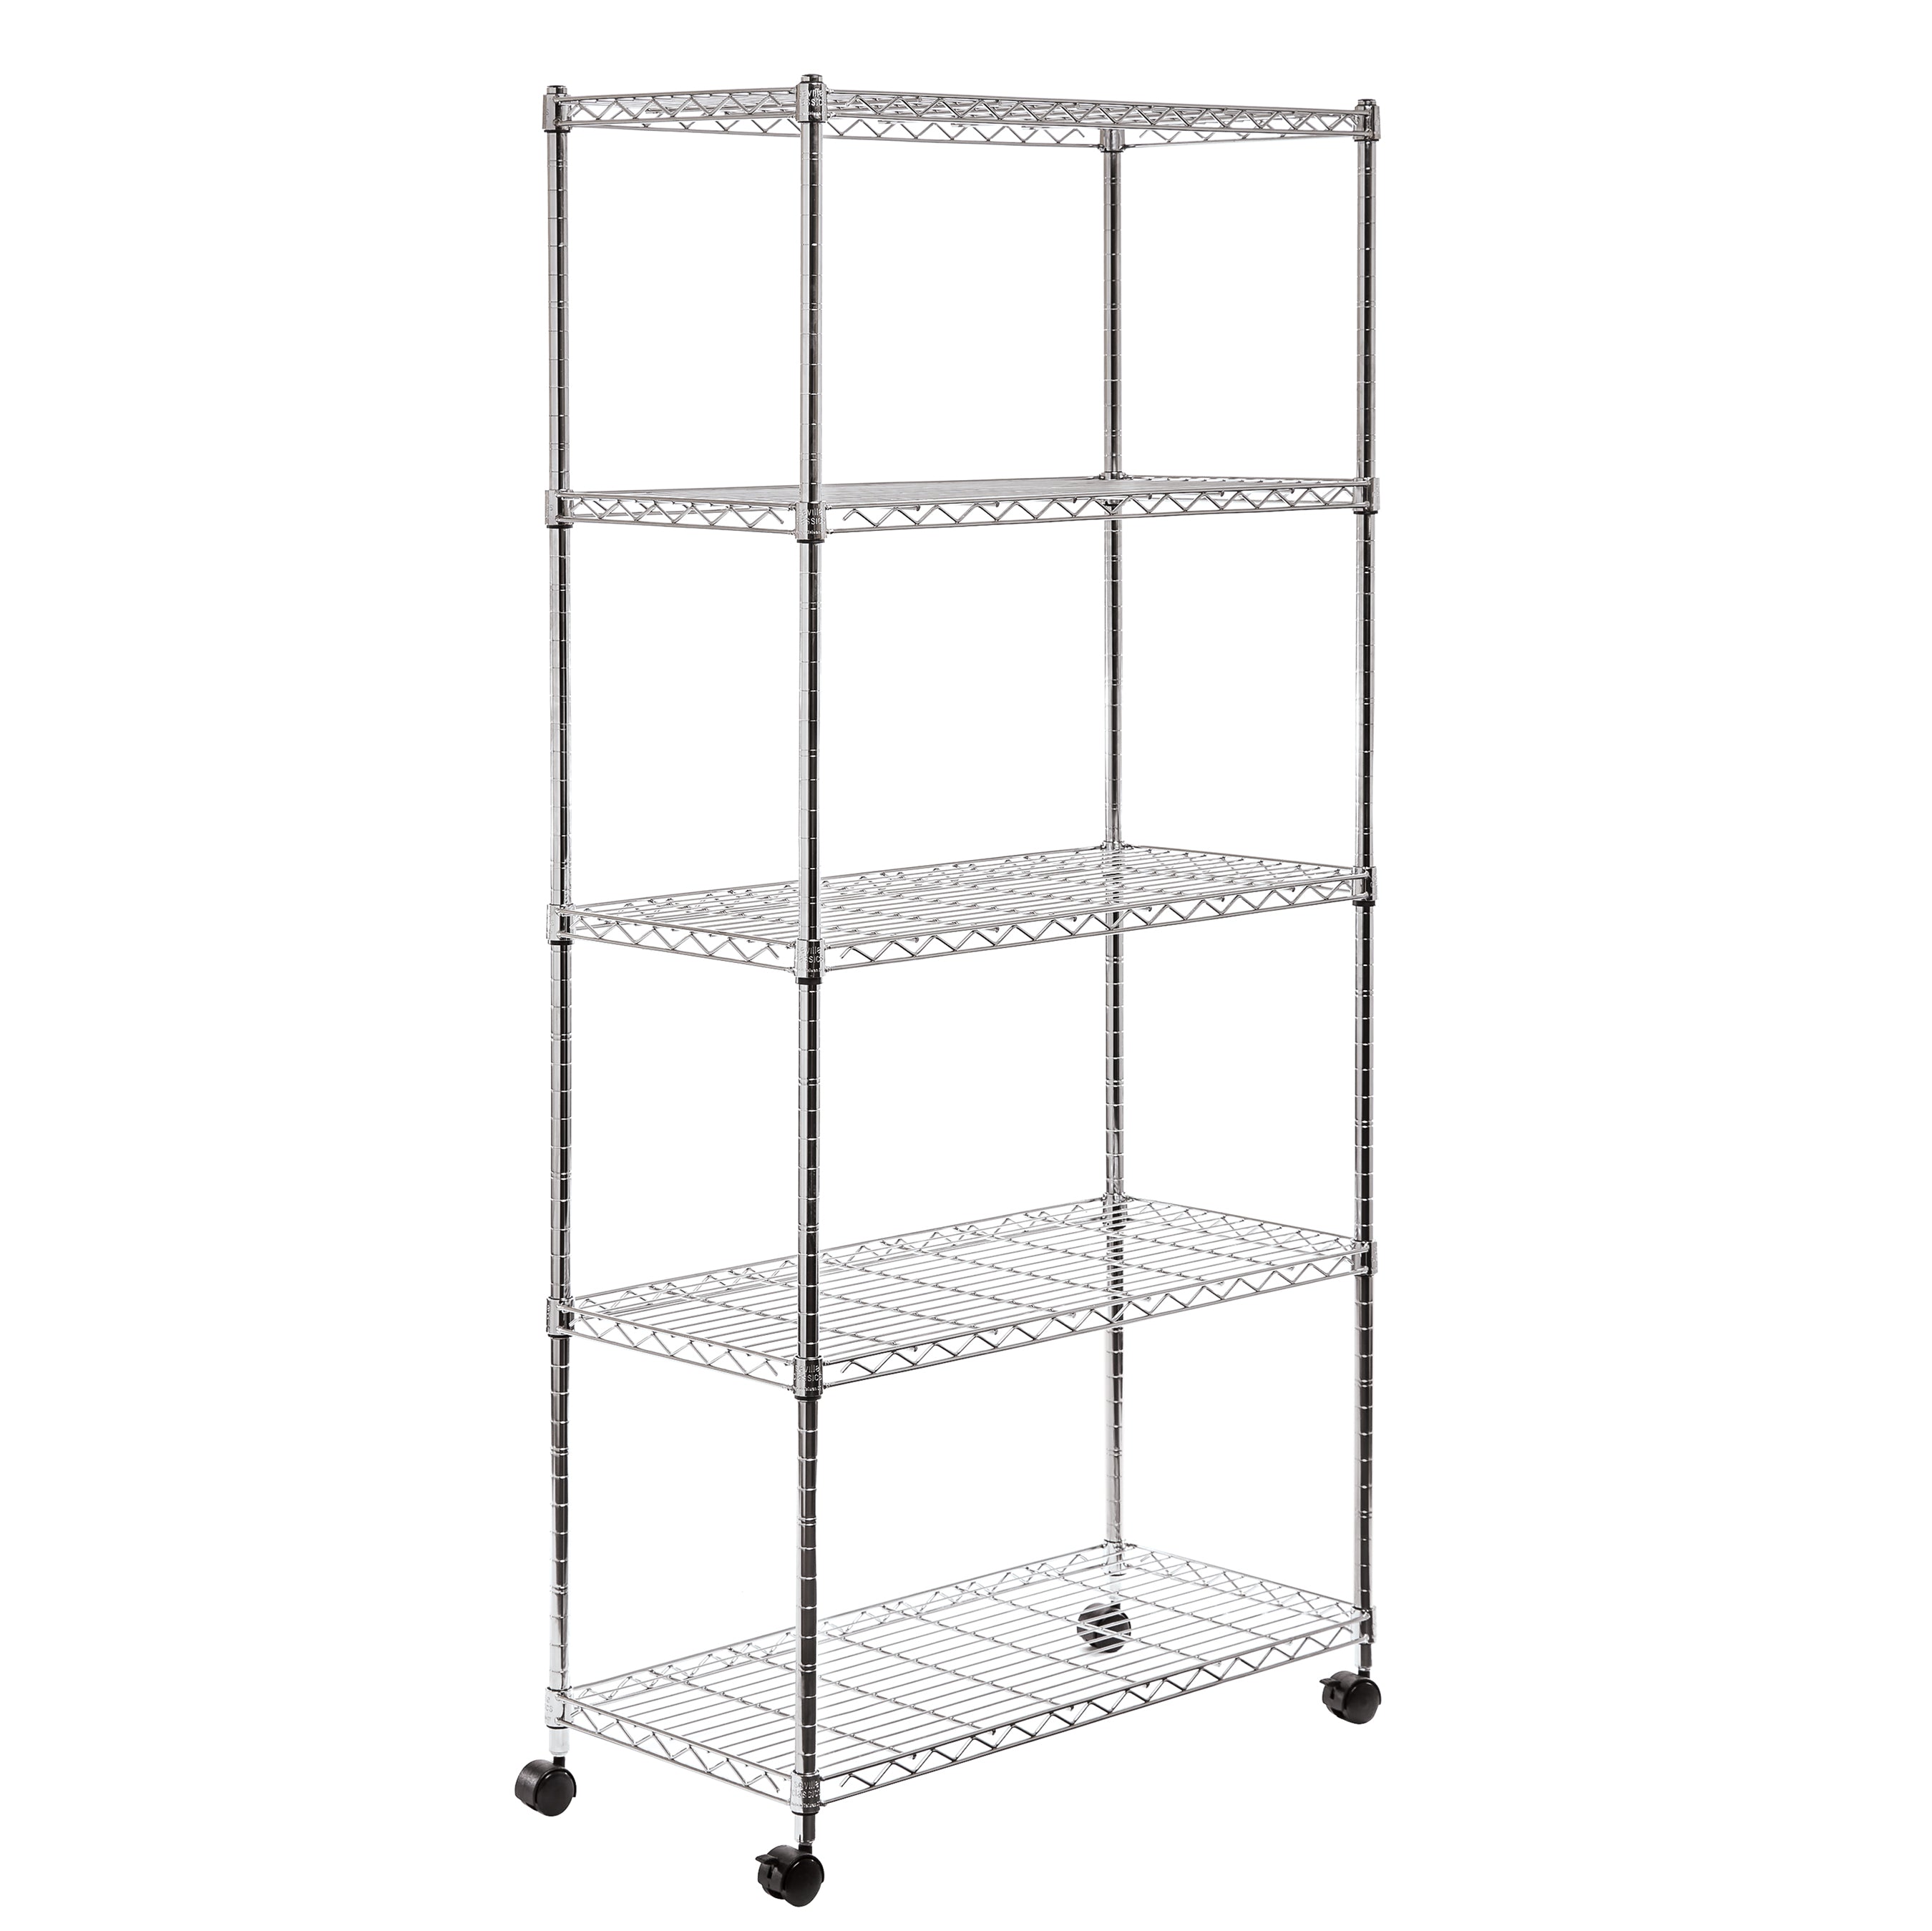 30 x 14 x 60, 5-TIER STEEL WIRE SHELVING WITH WHEELS, CHROME